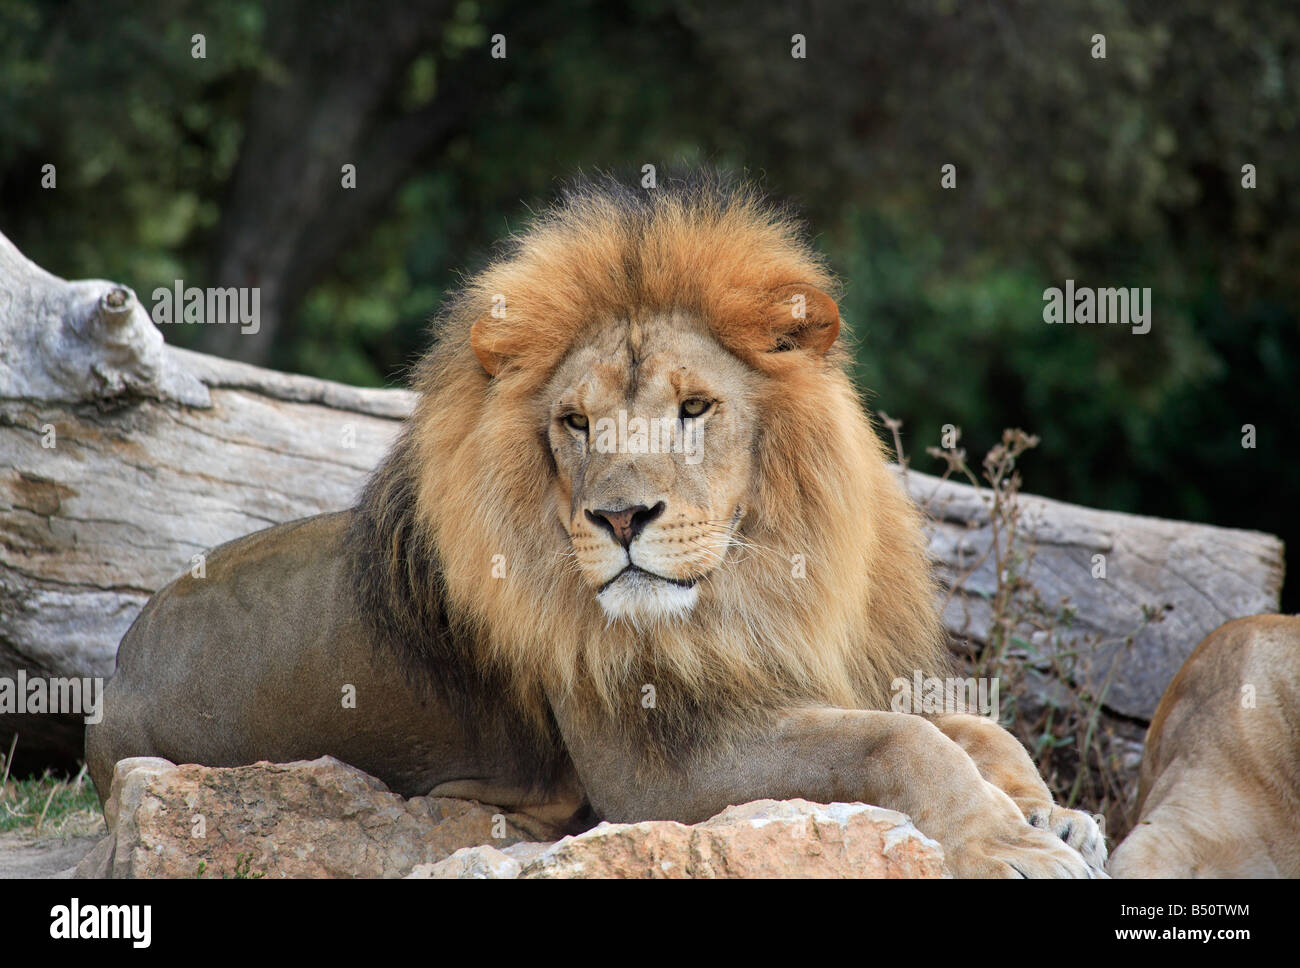 A male lion lying down in a zoo Stock Photo